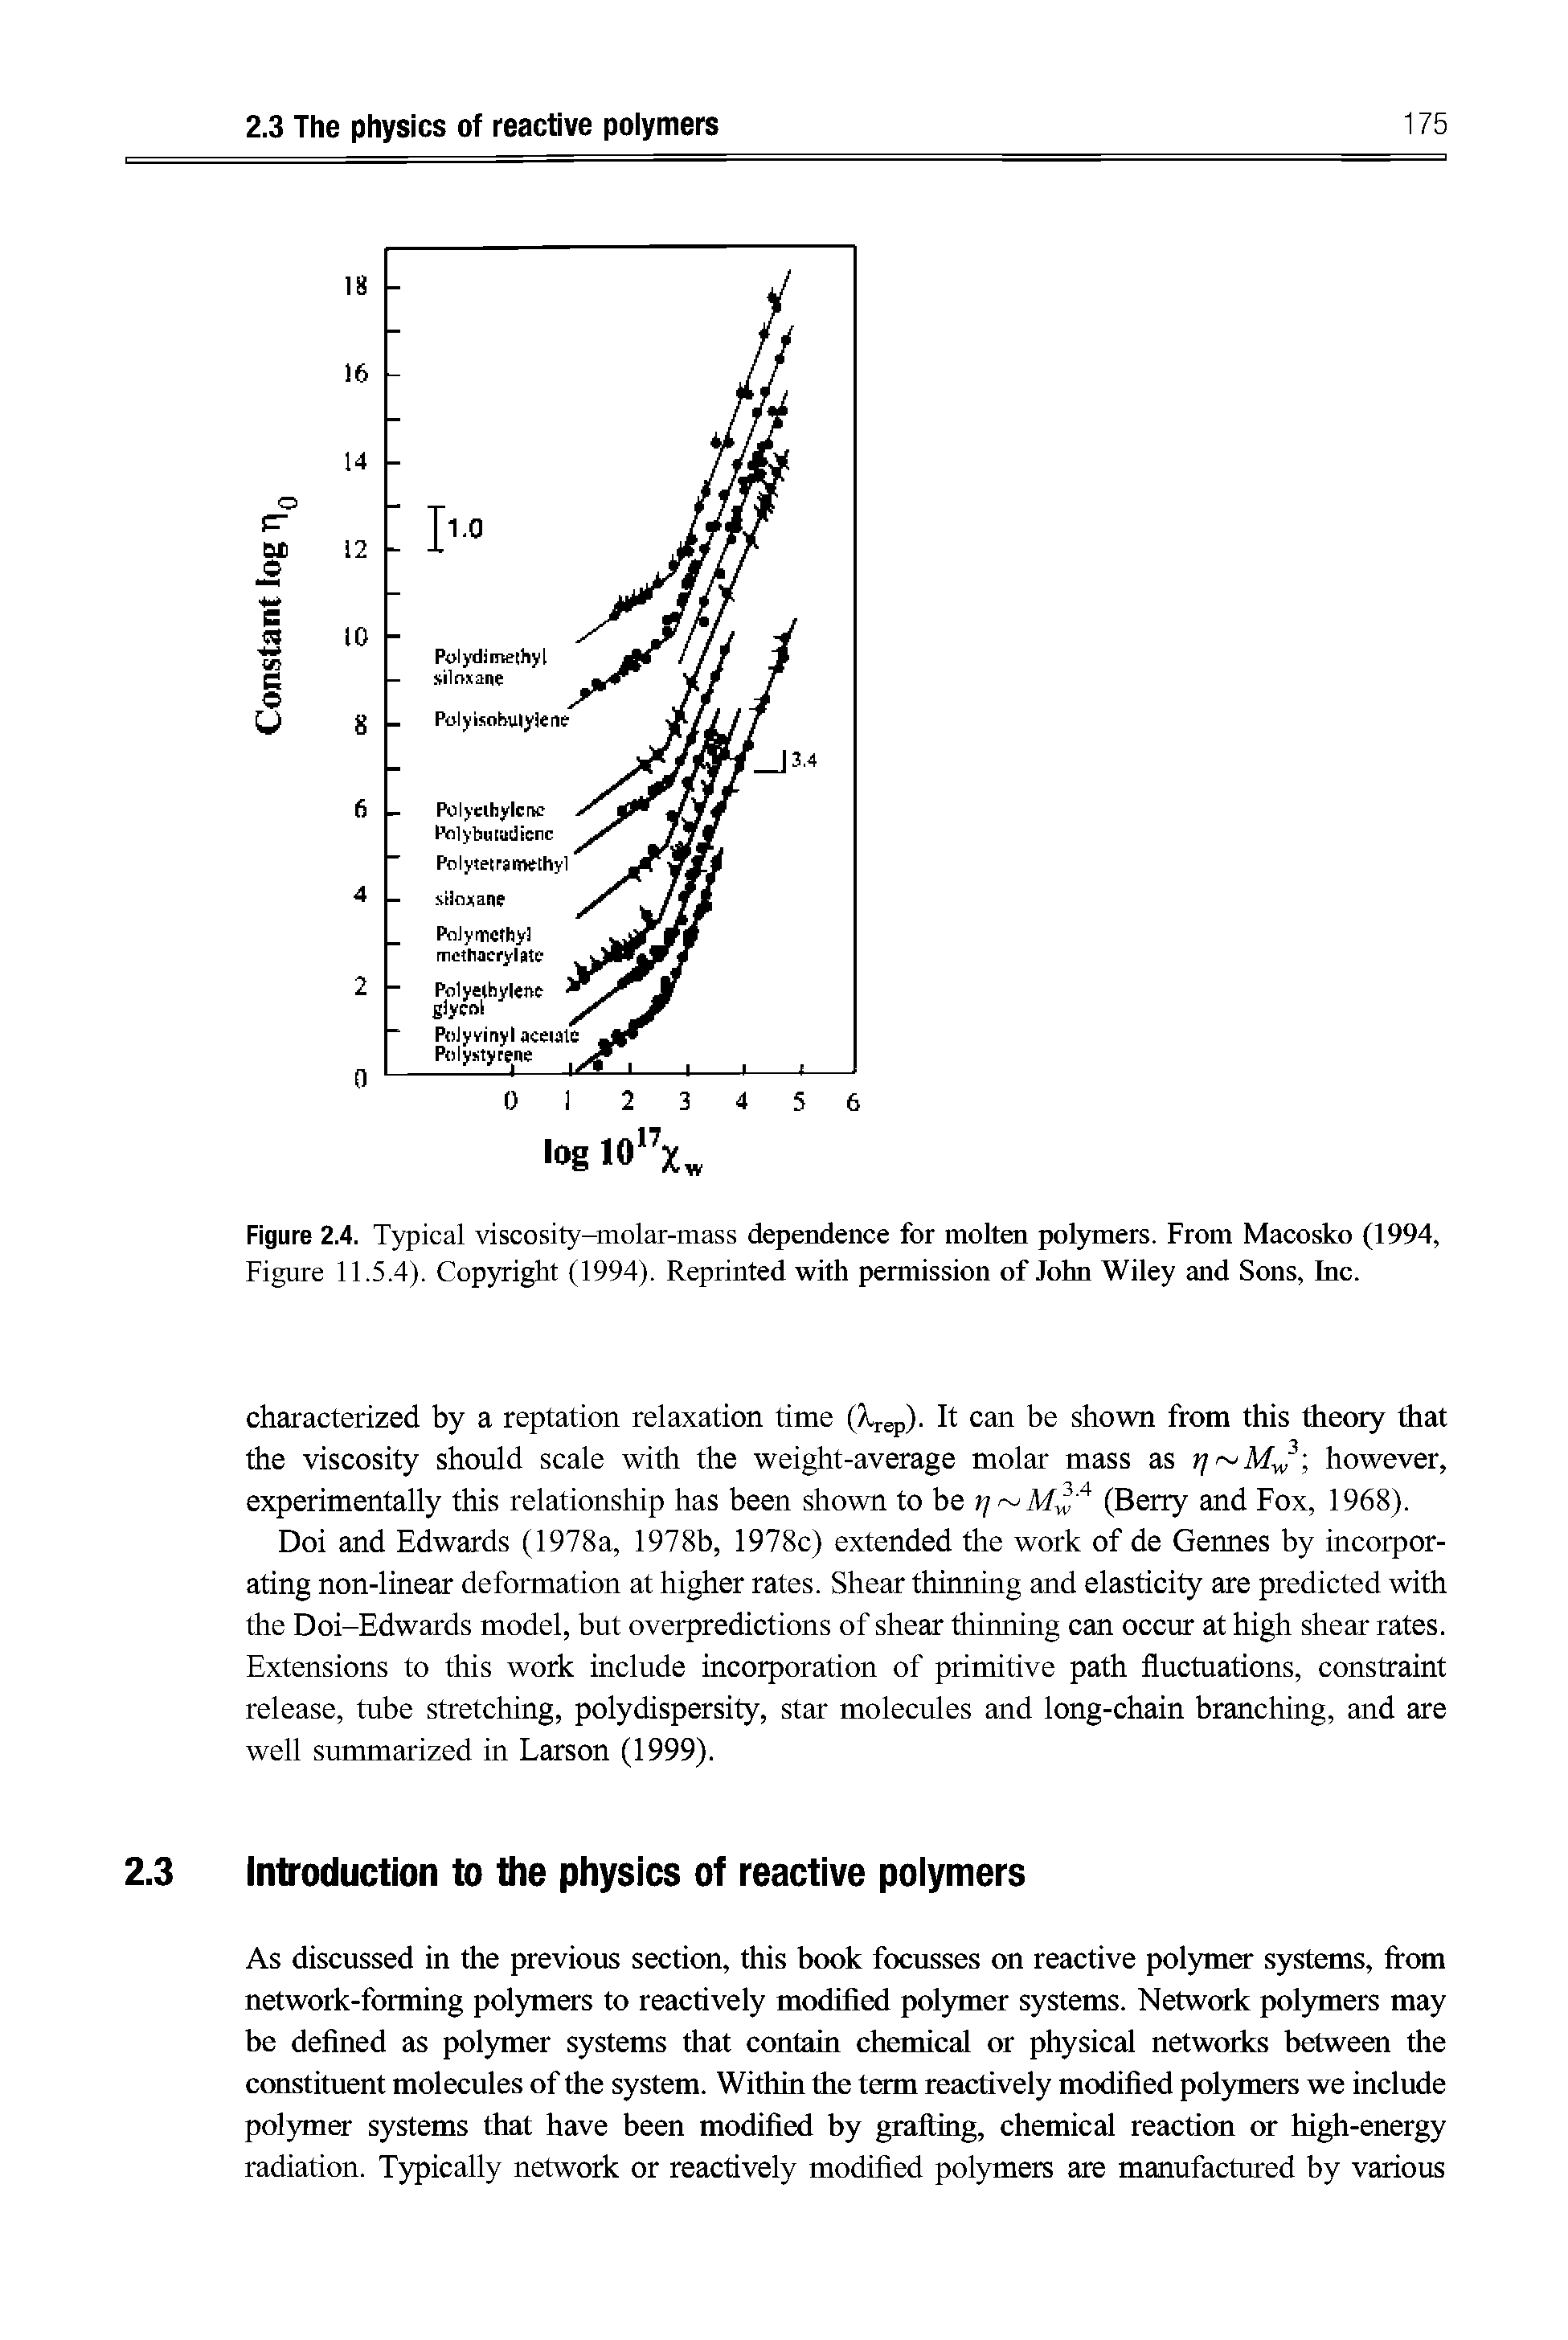 Figure 2.4. Typical viscosity-molar-mass dependence for molten polymers. From Macosko (1994, Figure 11.5.4). Cop)right (1994). Reprinted with permission of John Wiley and Sons, Inc.